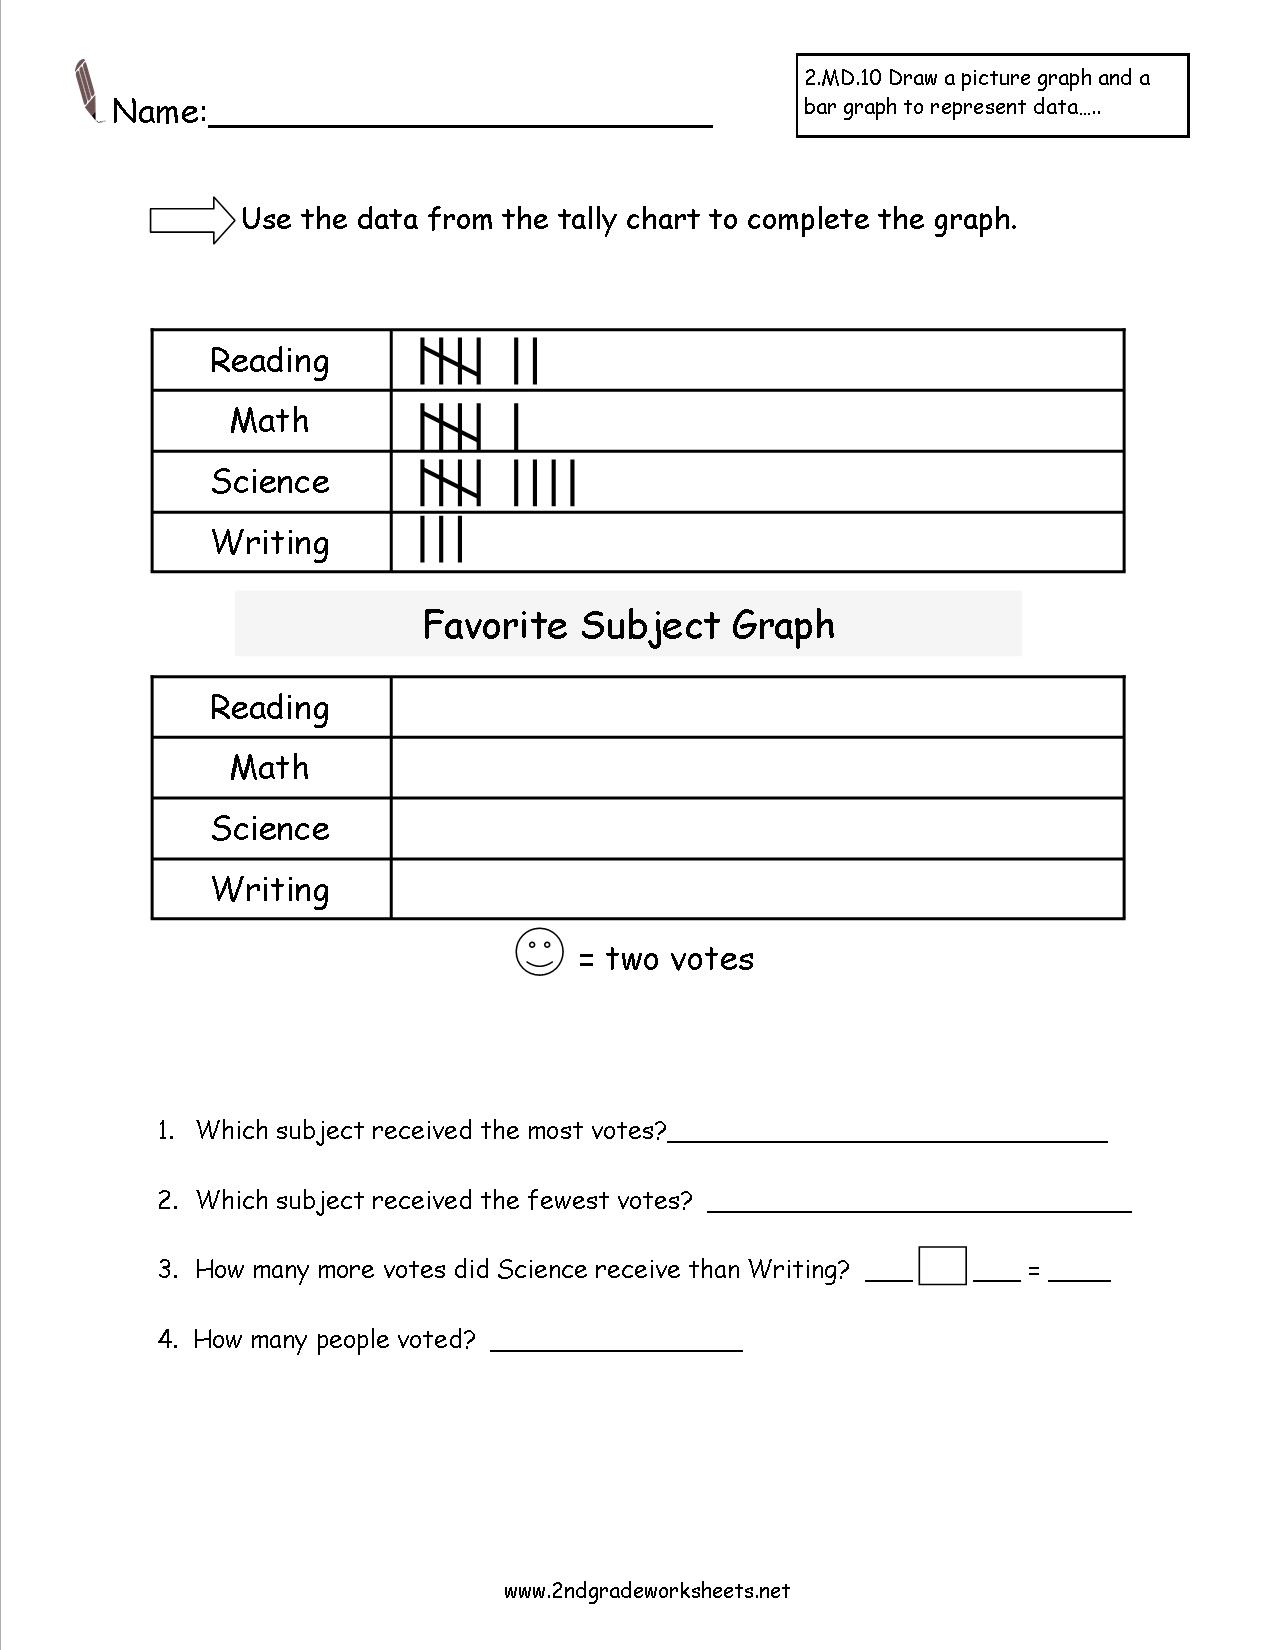 13 Best Images of Pictograph Worksheets Grade 2 Pictograph Worksheets